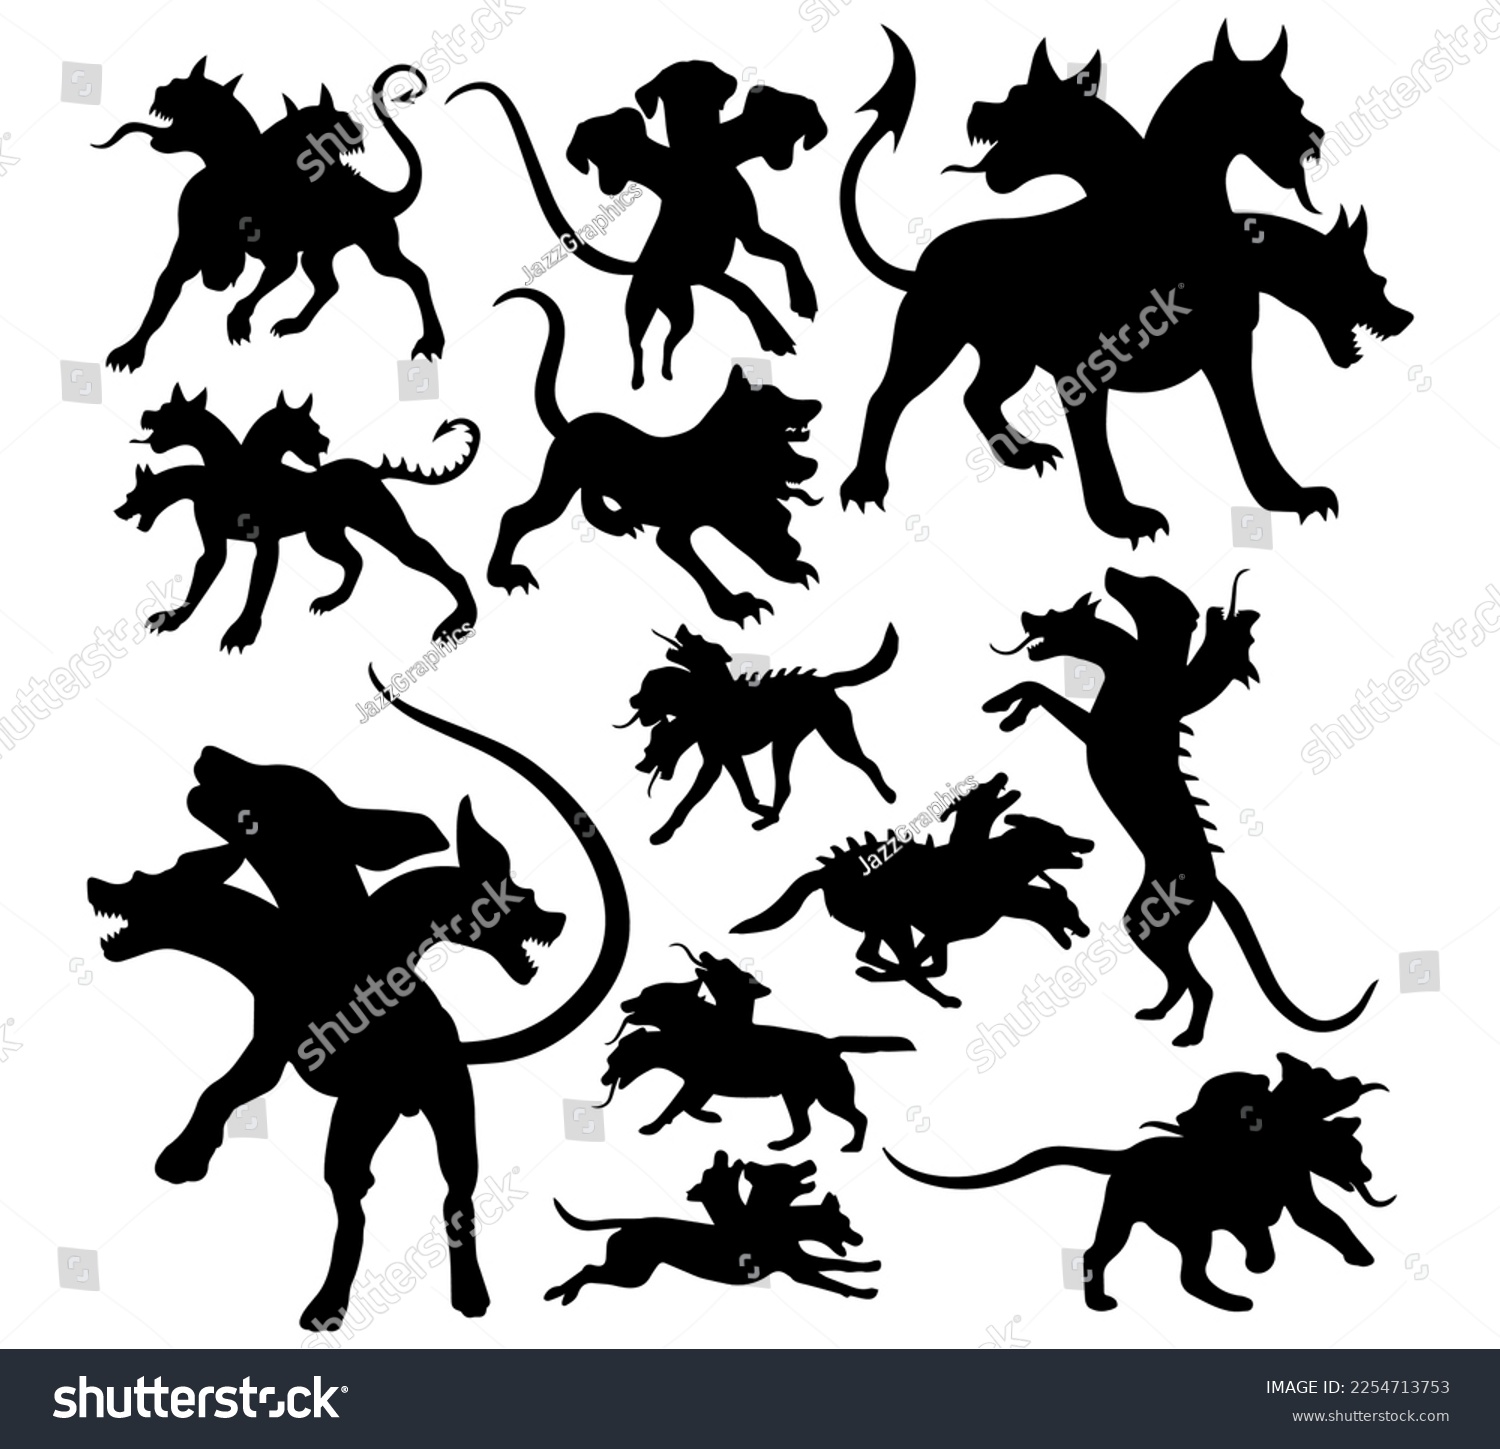 SVG of Silhouette collection of mythological people, monsters svg